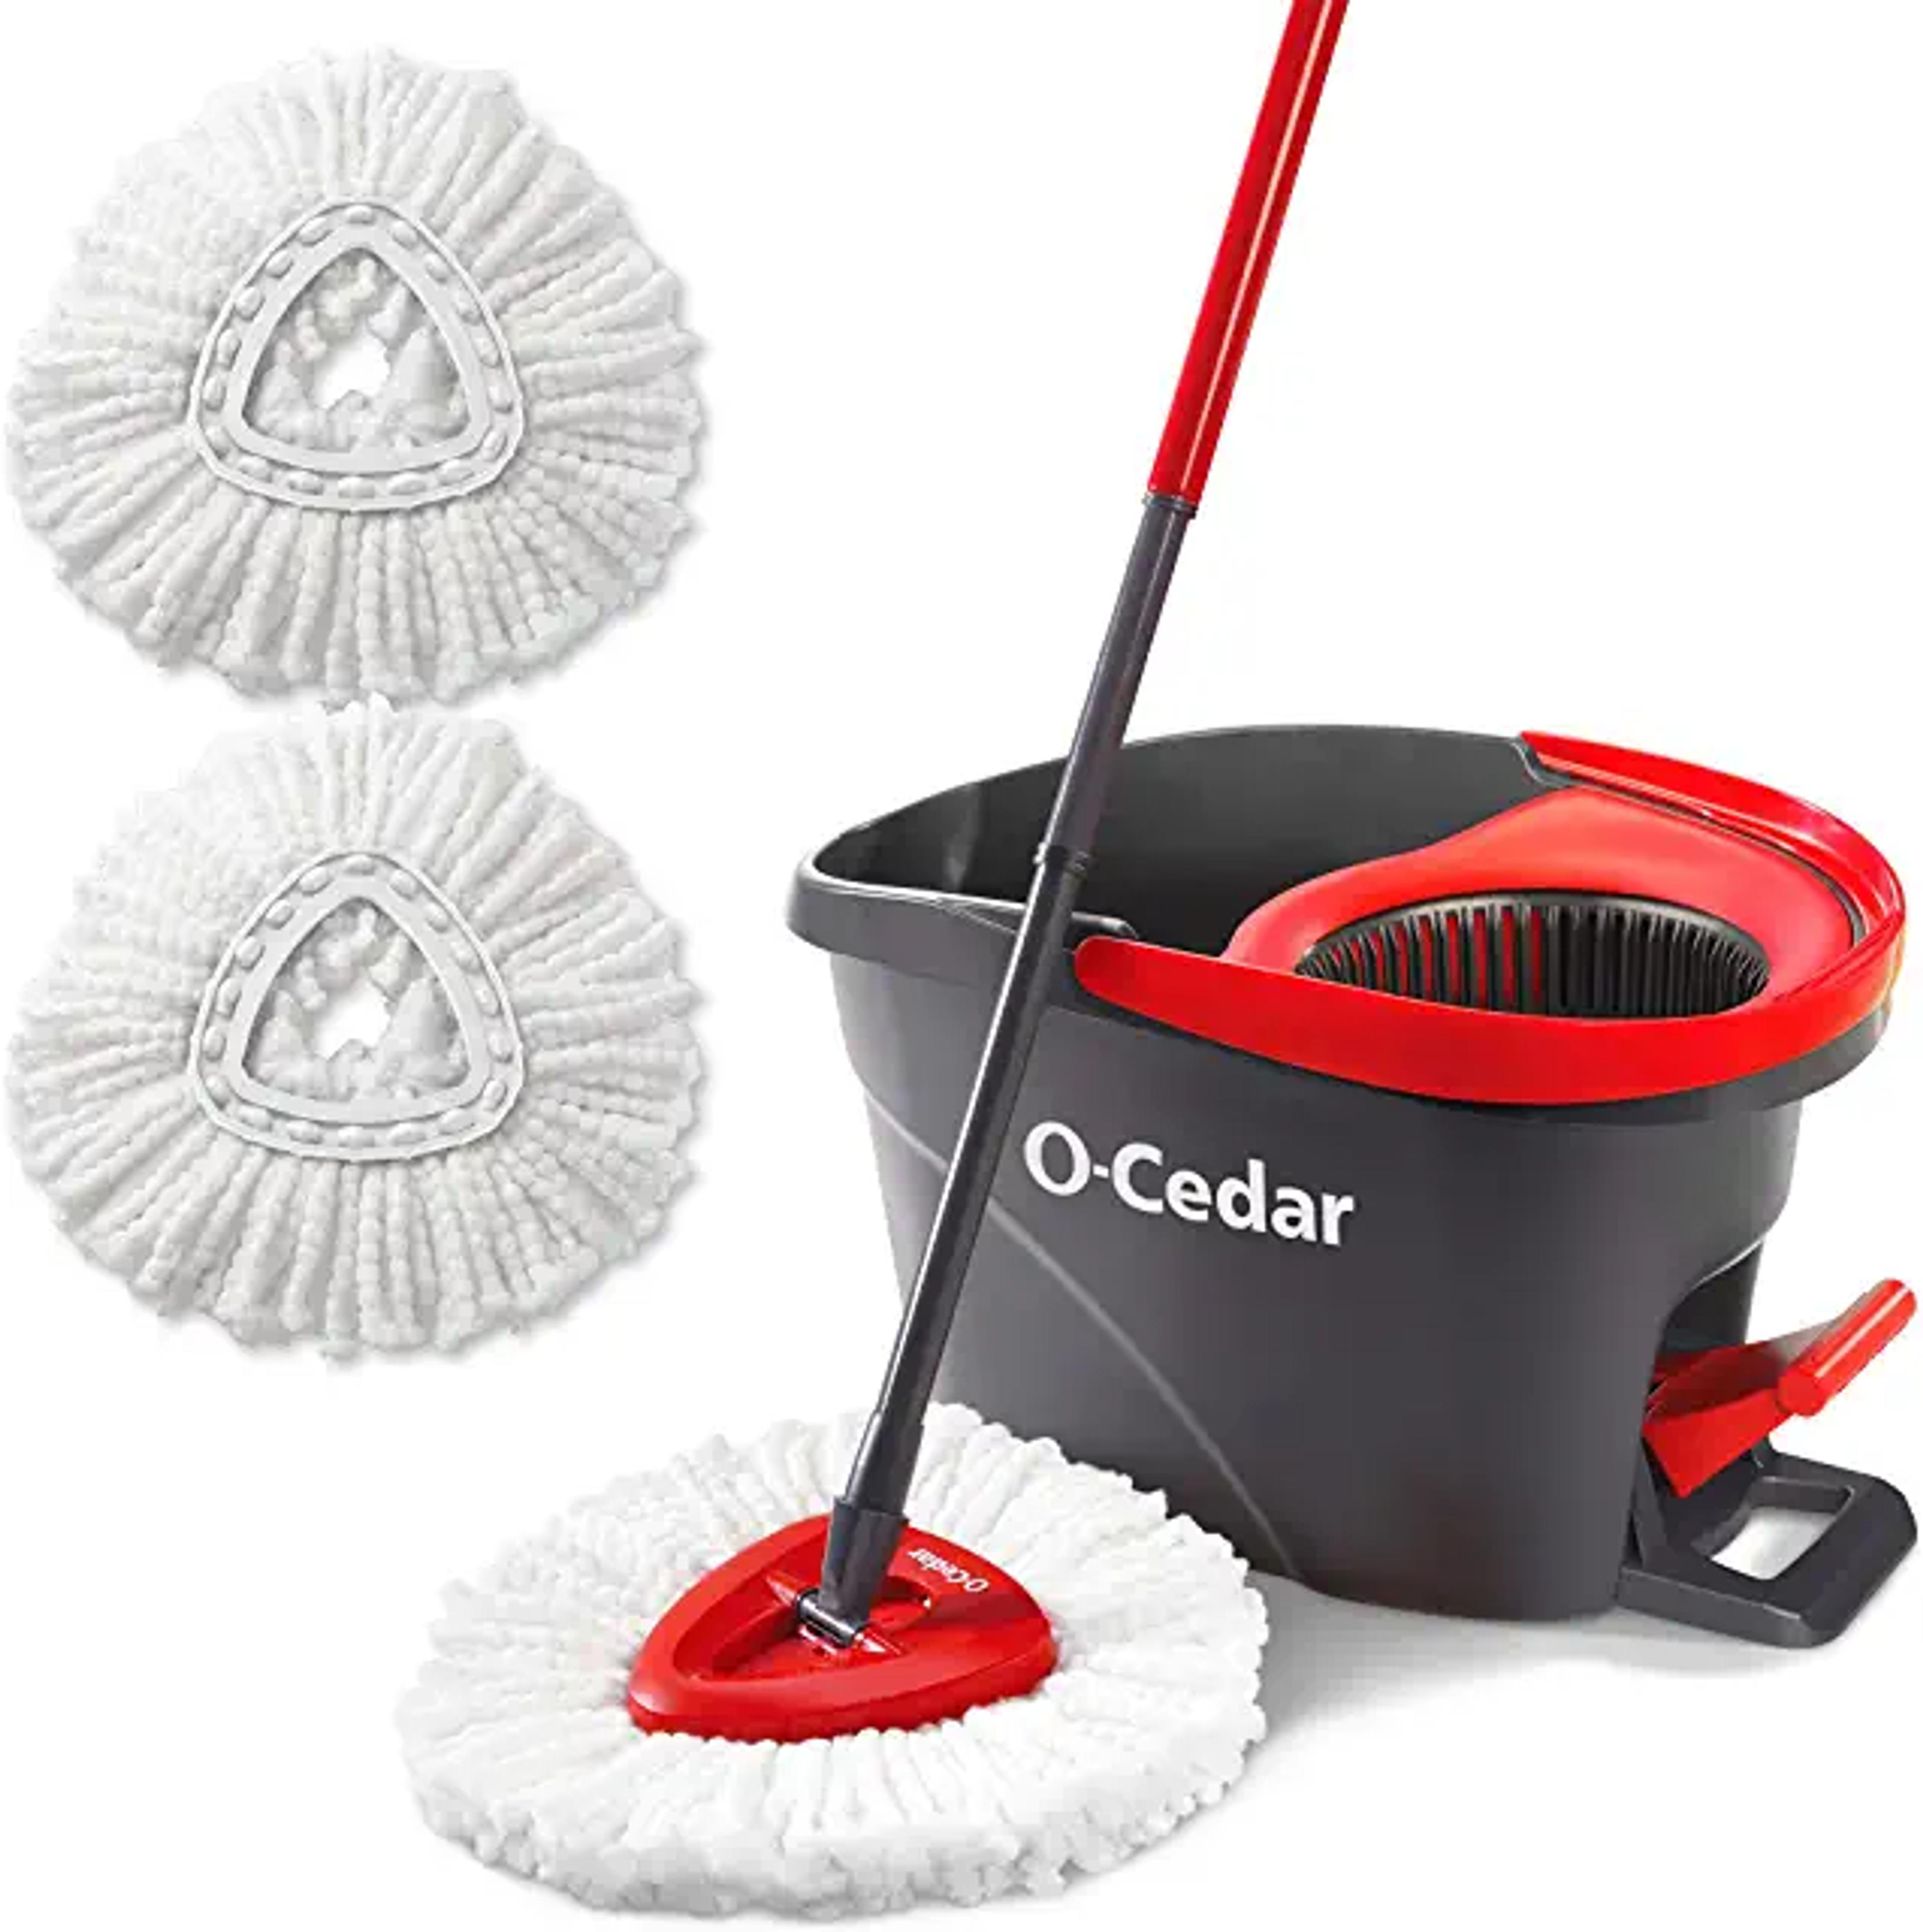 Amazon.com: O-Cedar EasyWring Microfiber Spin Mop & Bucket Floor Cleaning System + 2 Extra Refills, Red/Gray : Health & Household